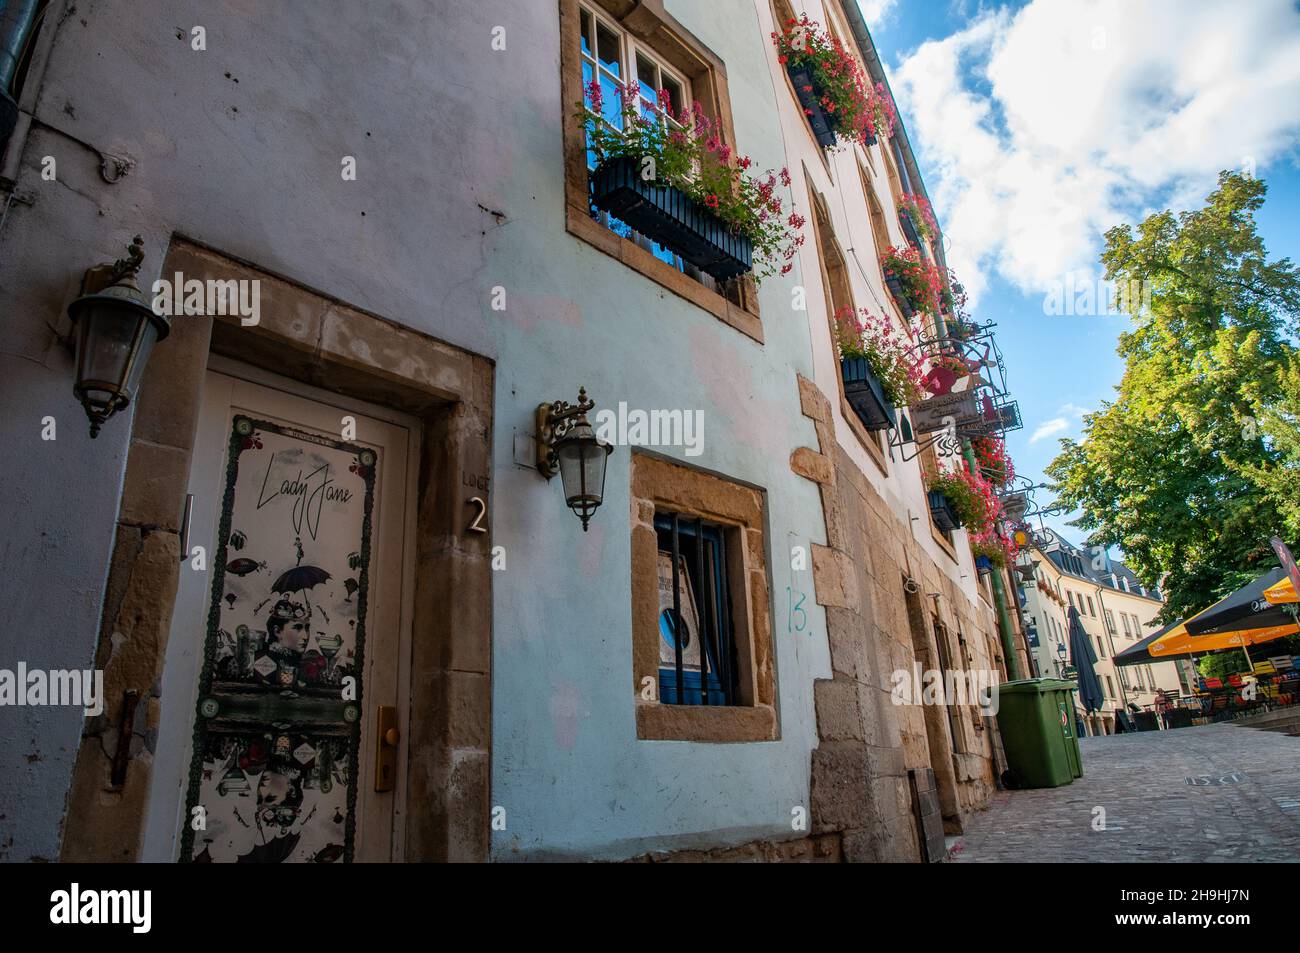 The cobbled and narrow street Rue de l'Aeu opening up to a small square with restaurants in the old, historic part of Luxembourg City. Stock Photo